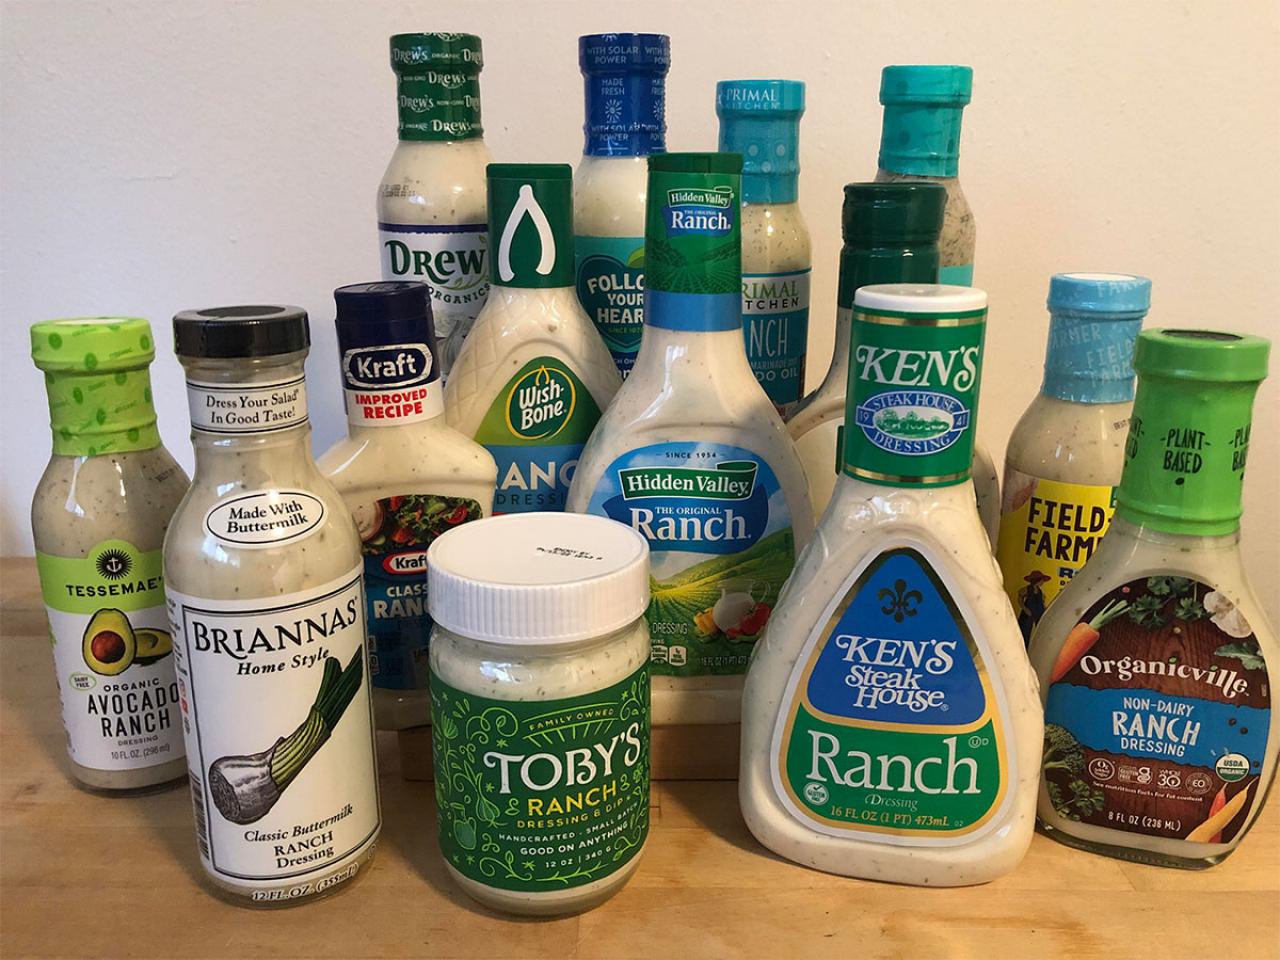 Stainless Steel Salad Dressing Containers Review: I Tried It